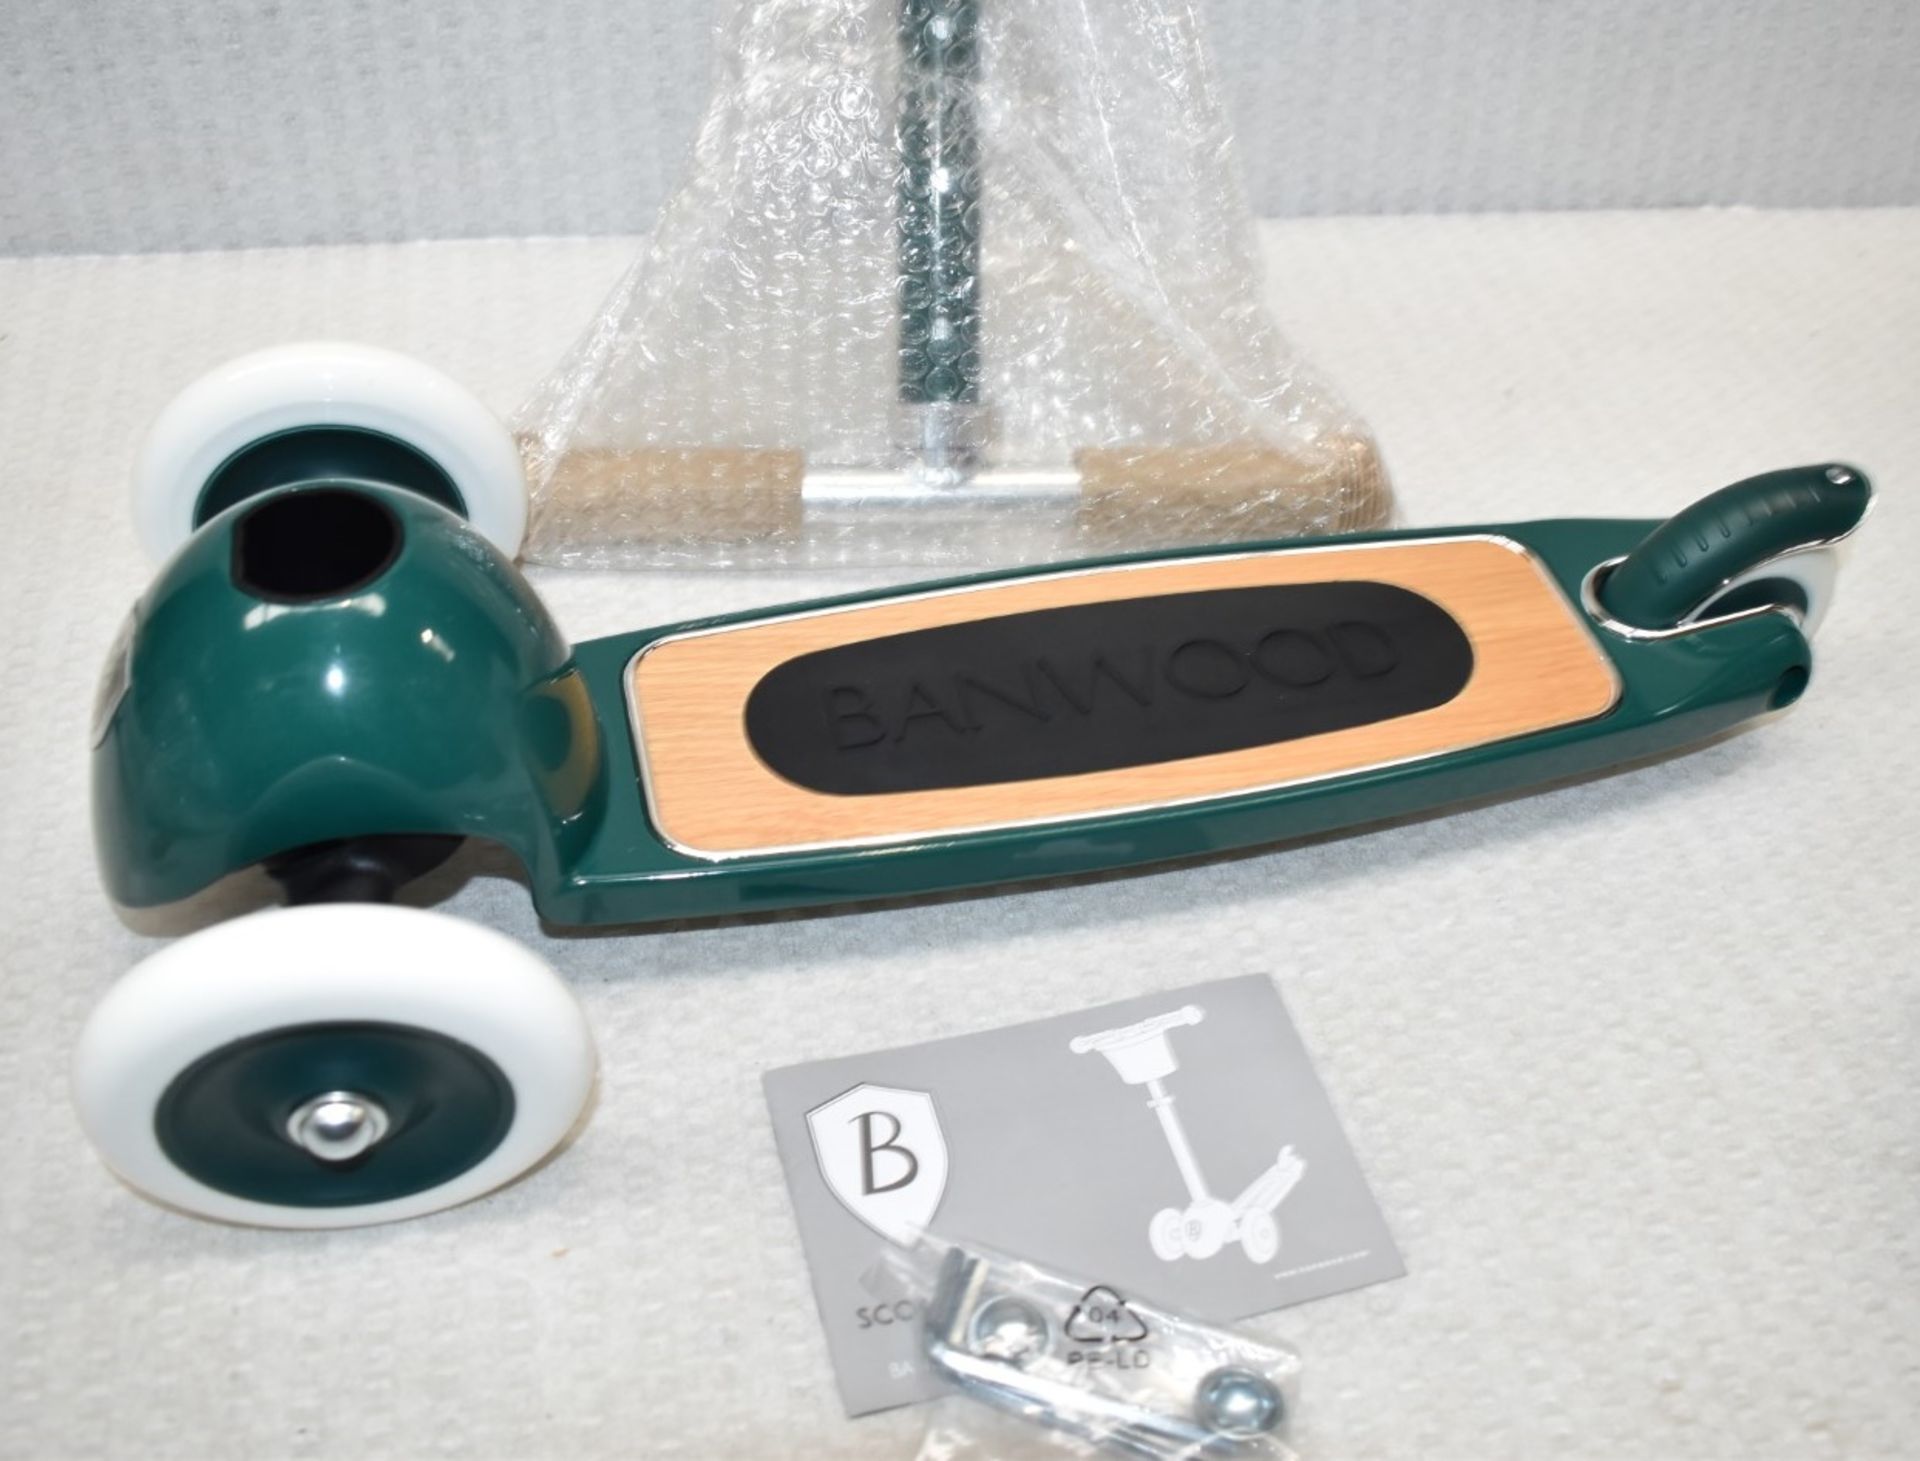 1 x BANWOOD Scooter Bike in Green - Original Price £119.00 - Boxed - Image 10 of 12